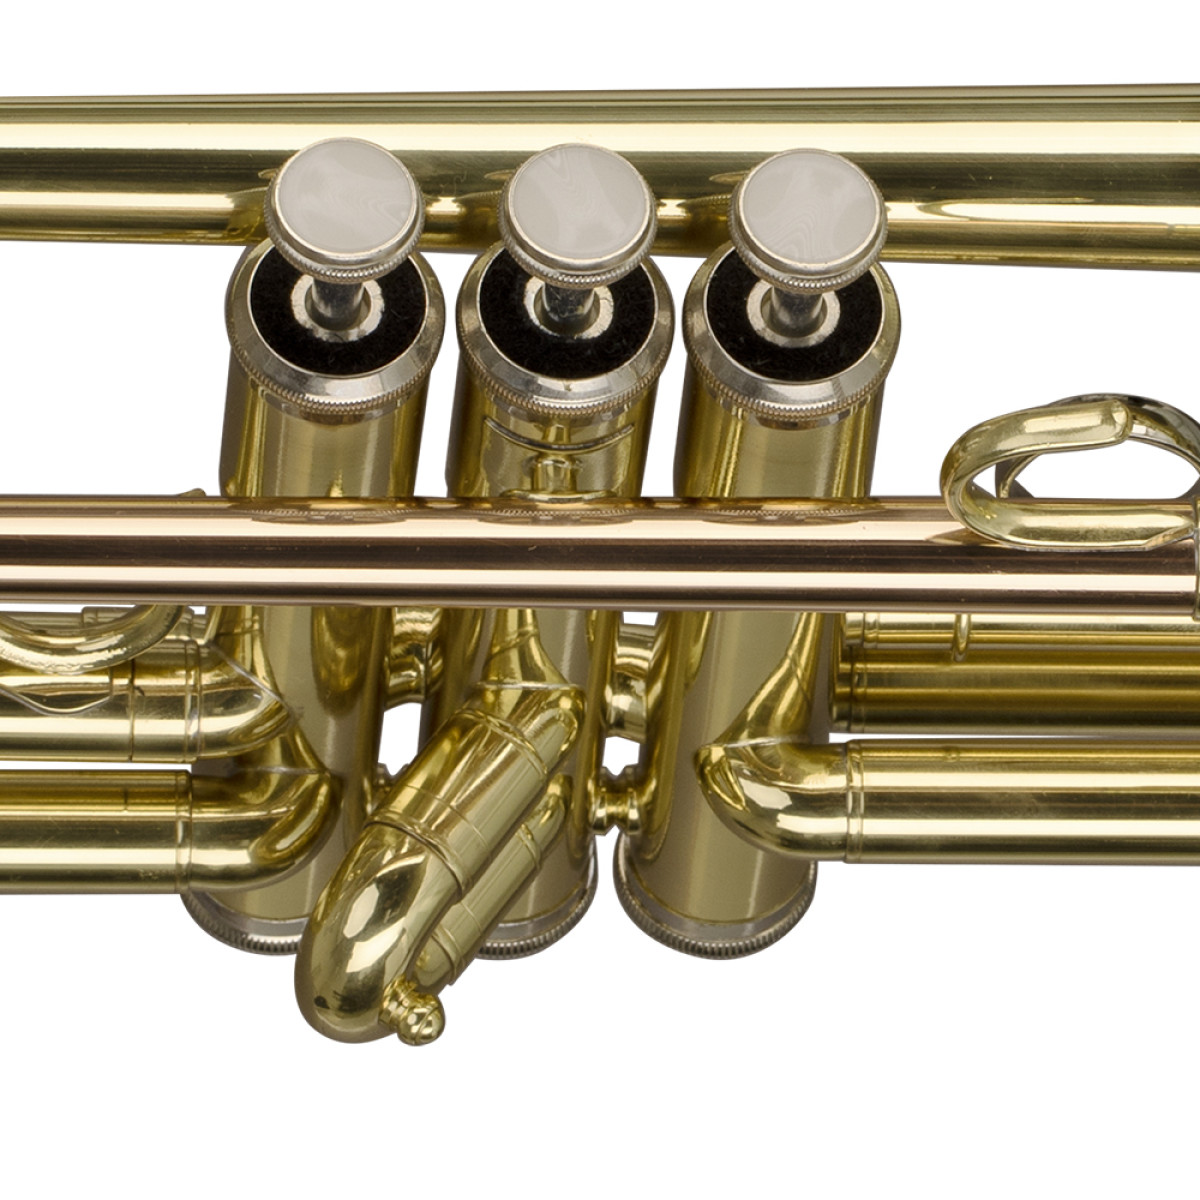 Stagg Tr215s - Trumpet of study - Variation 1